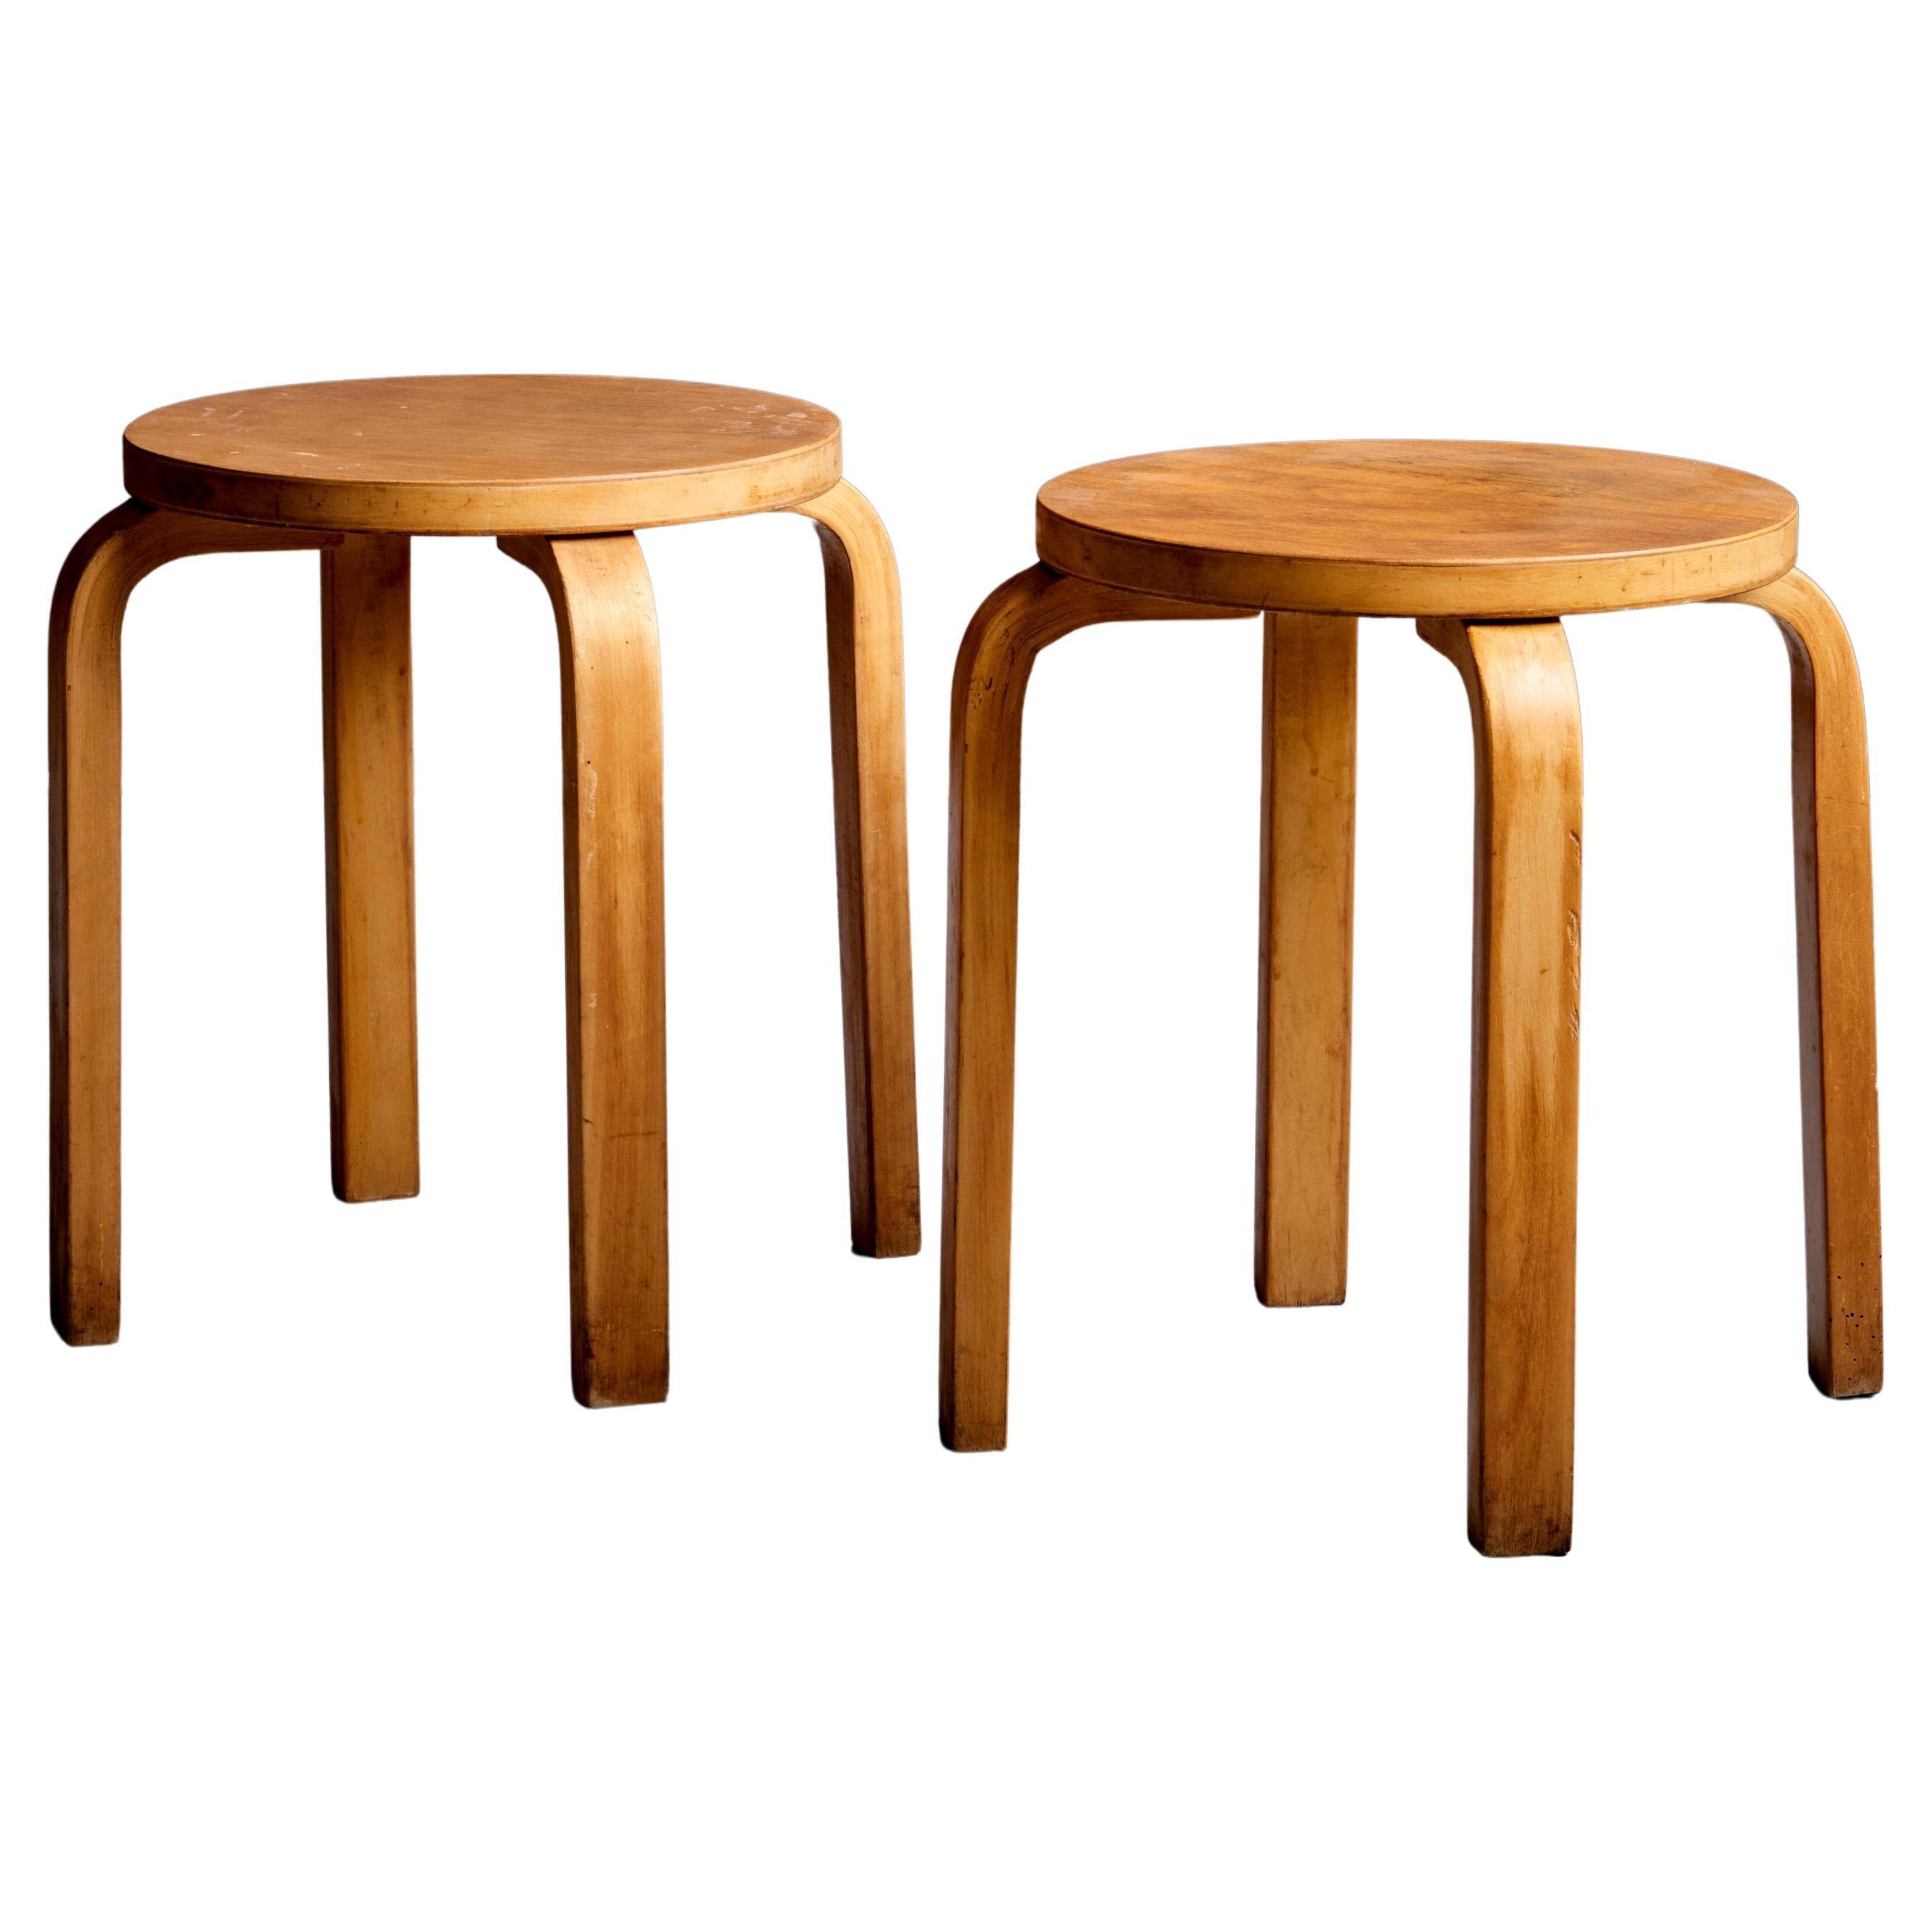 Set of 2 Early Alvar Aalto Stools, Finland, 1950's For Sale